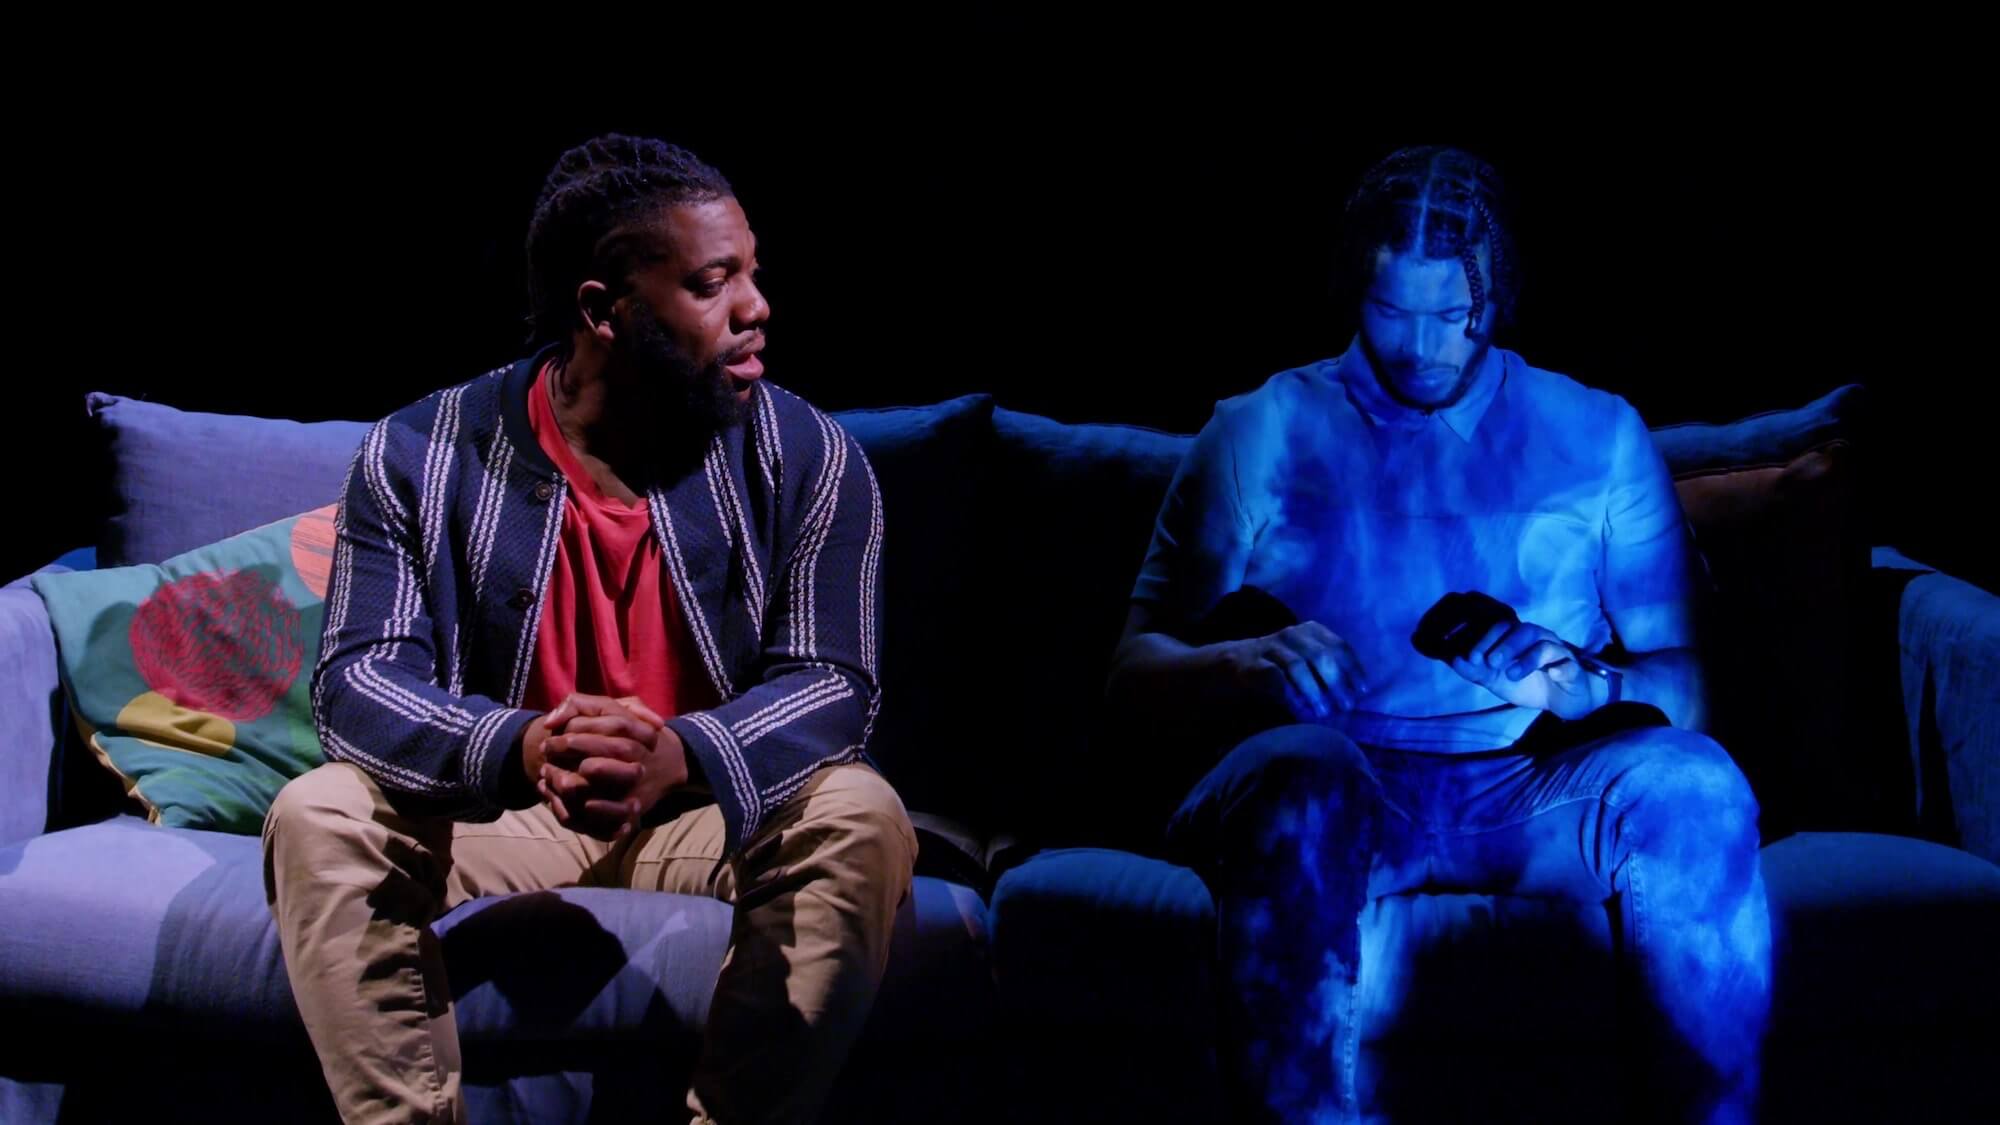 Fehinti Balogun sits on a sofa, talking seriously to a hologram person sitting next to him